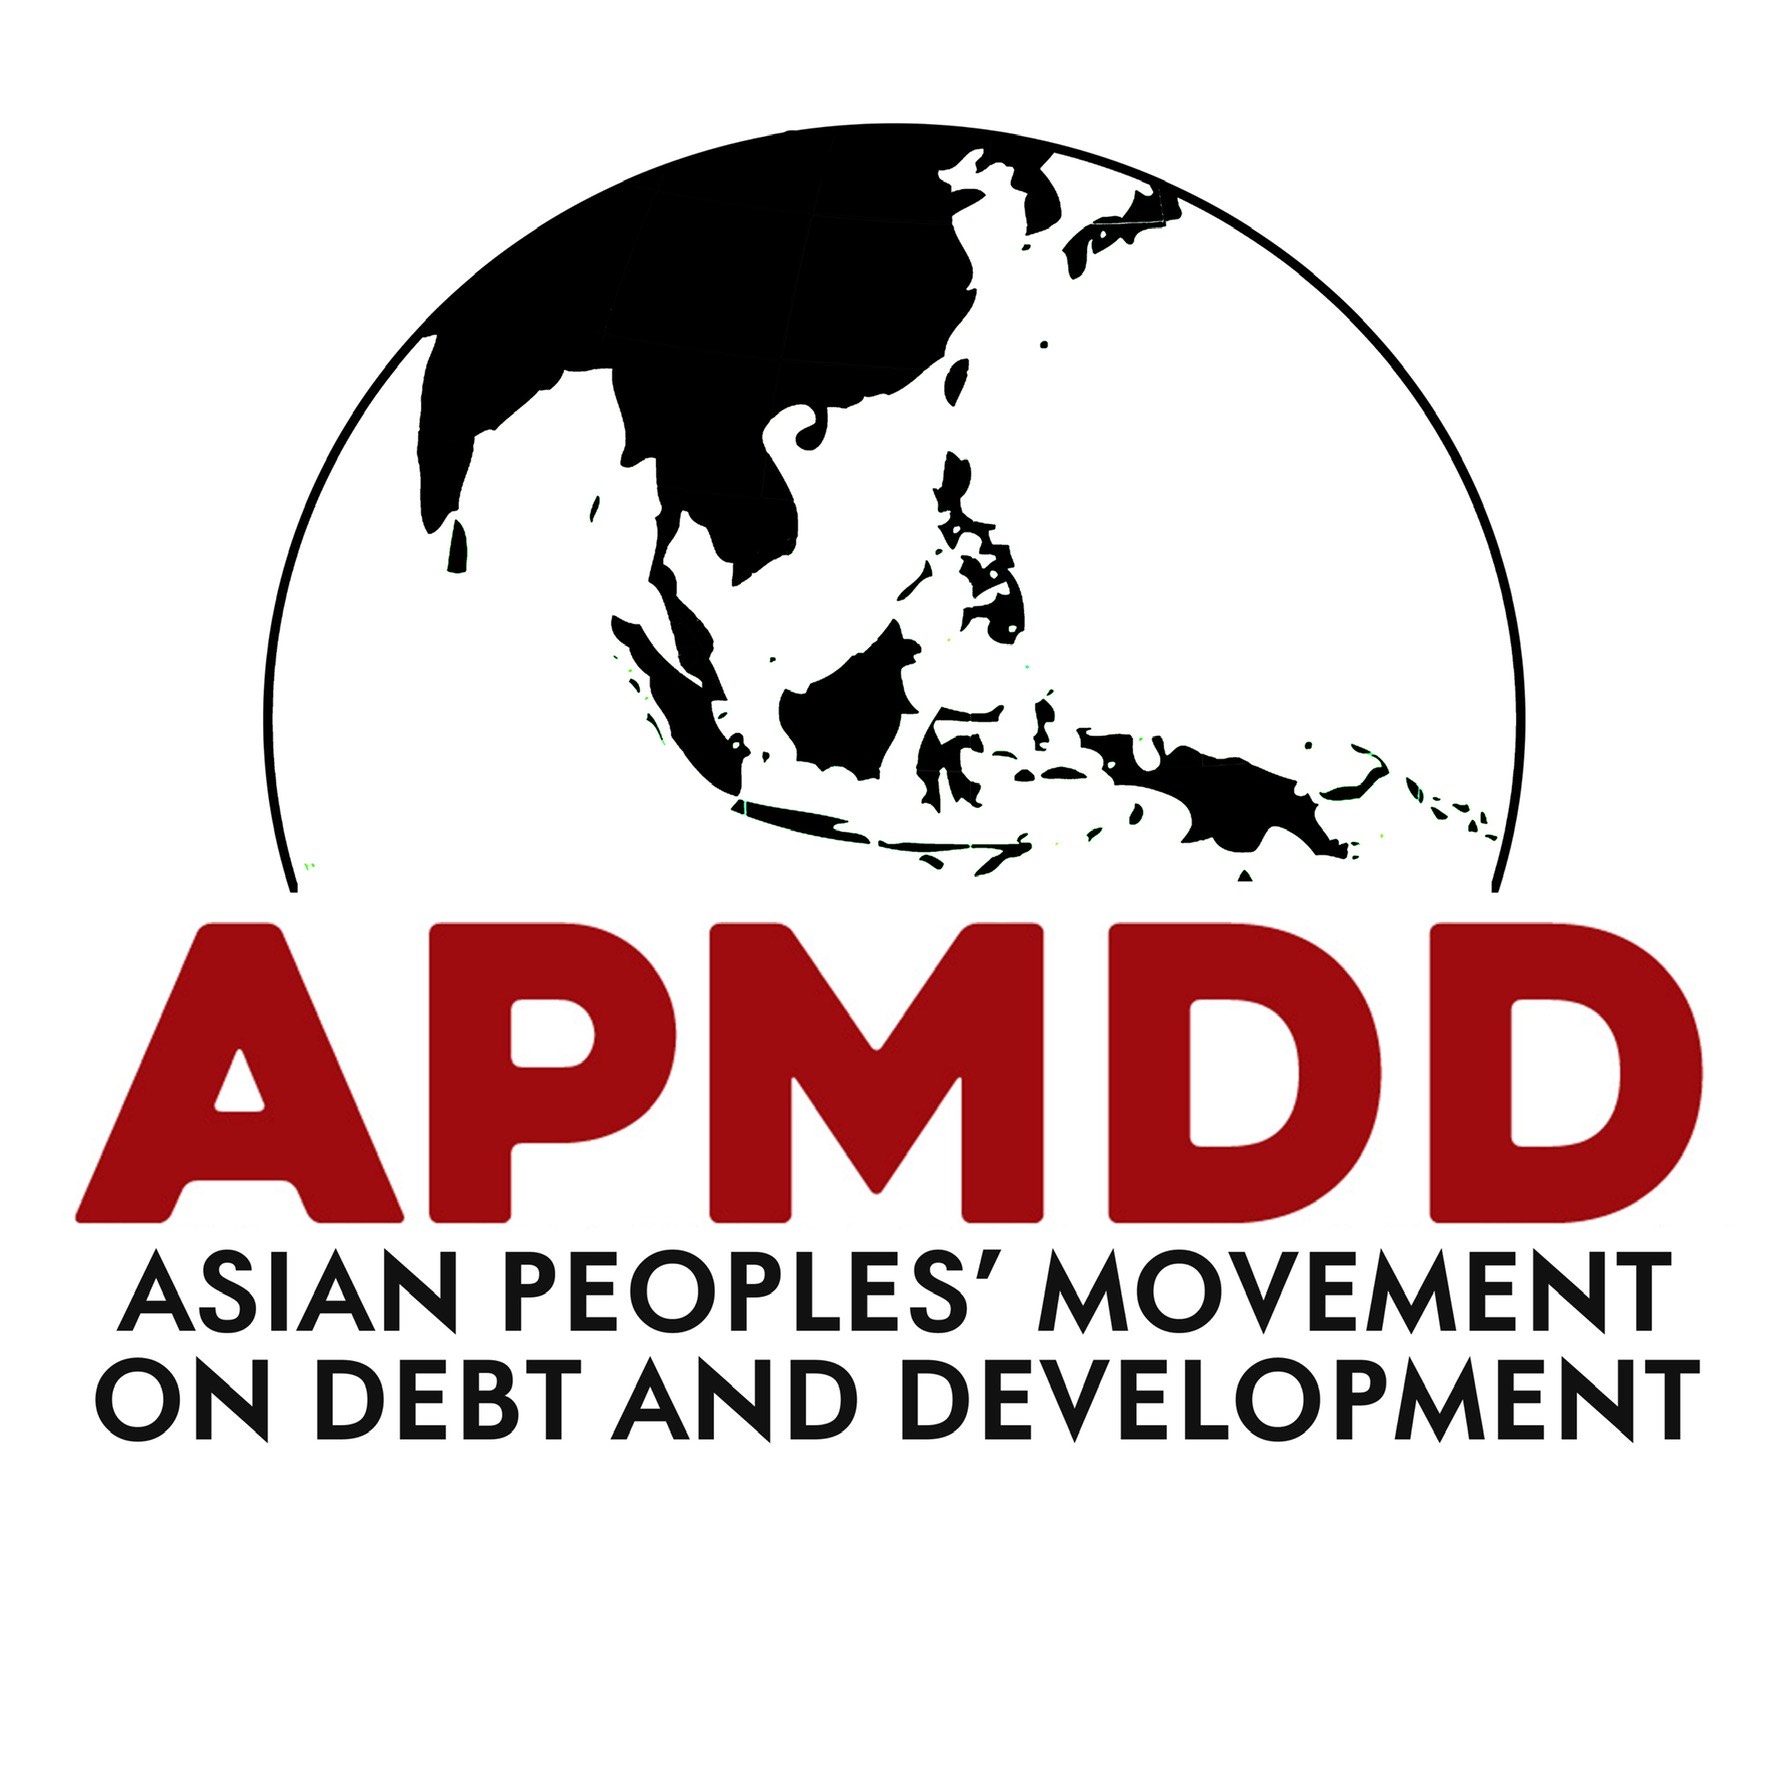 ASIAN PEOPLES’ MOVEMENT ON DEBT AND DEVELOPMENT